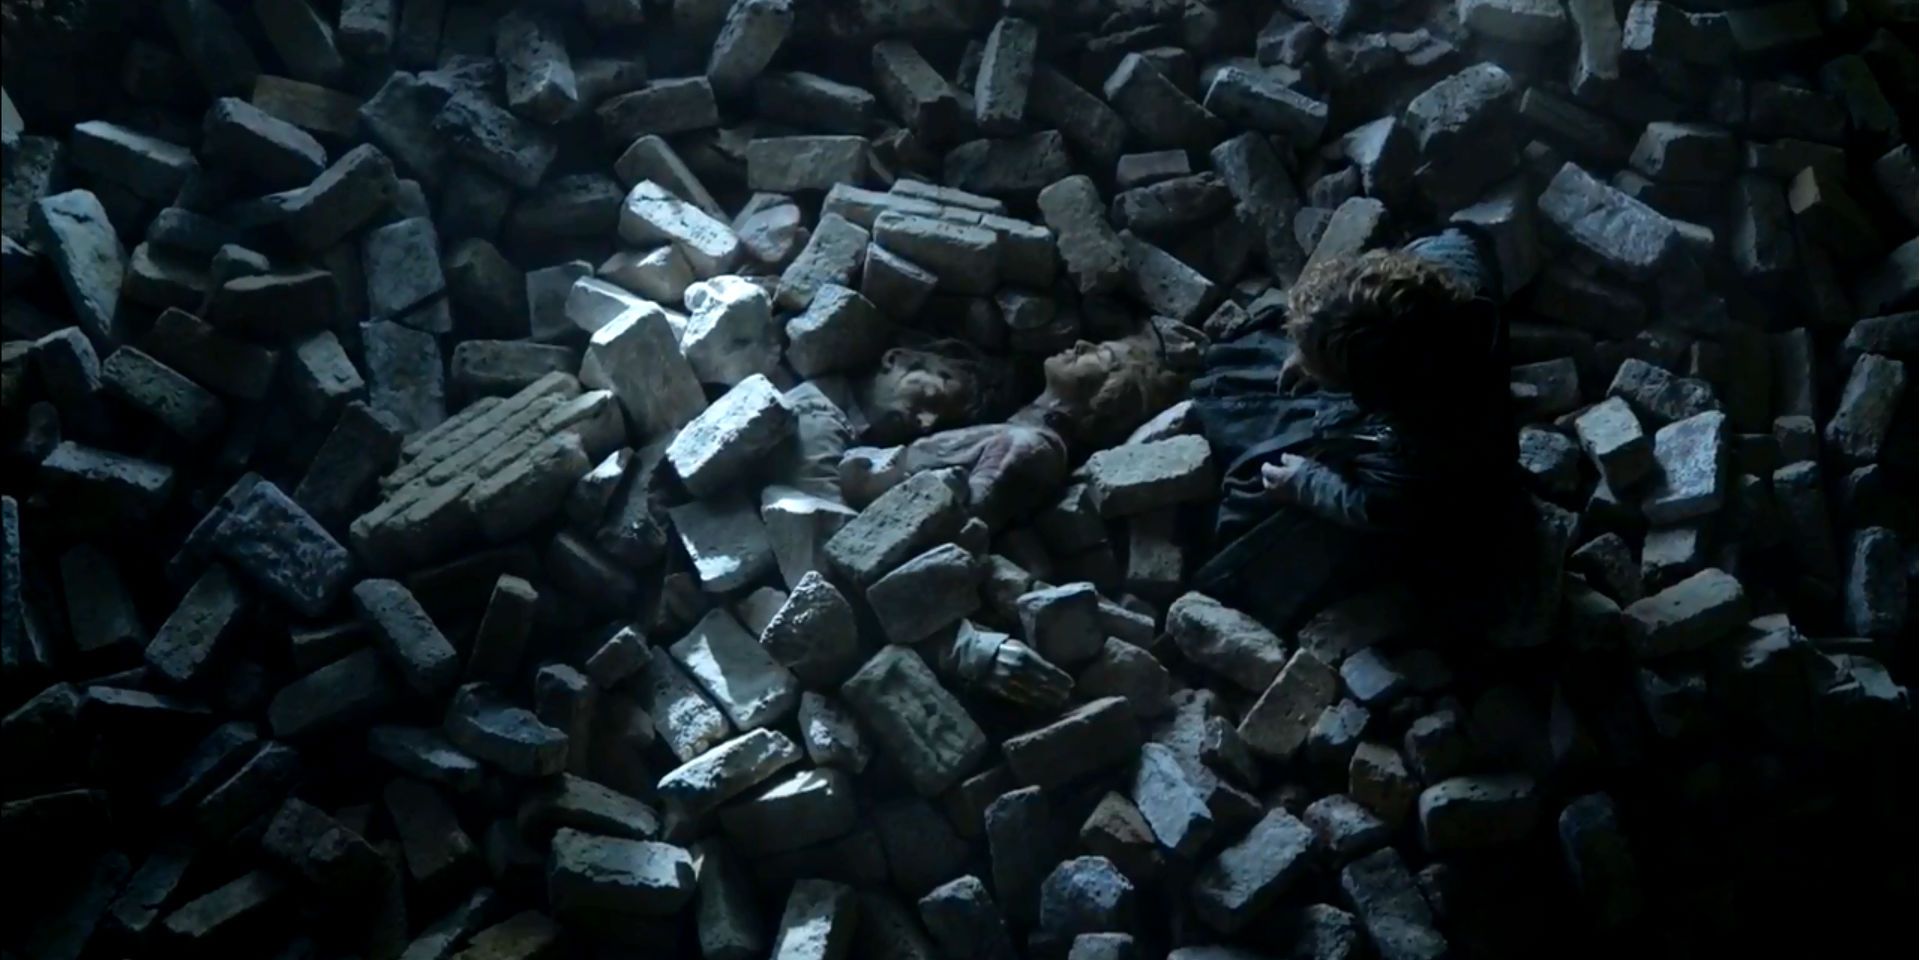 Game of Thrones 5 Subplots That Were Wrapped Up Perfectly (& 5 That Werent)